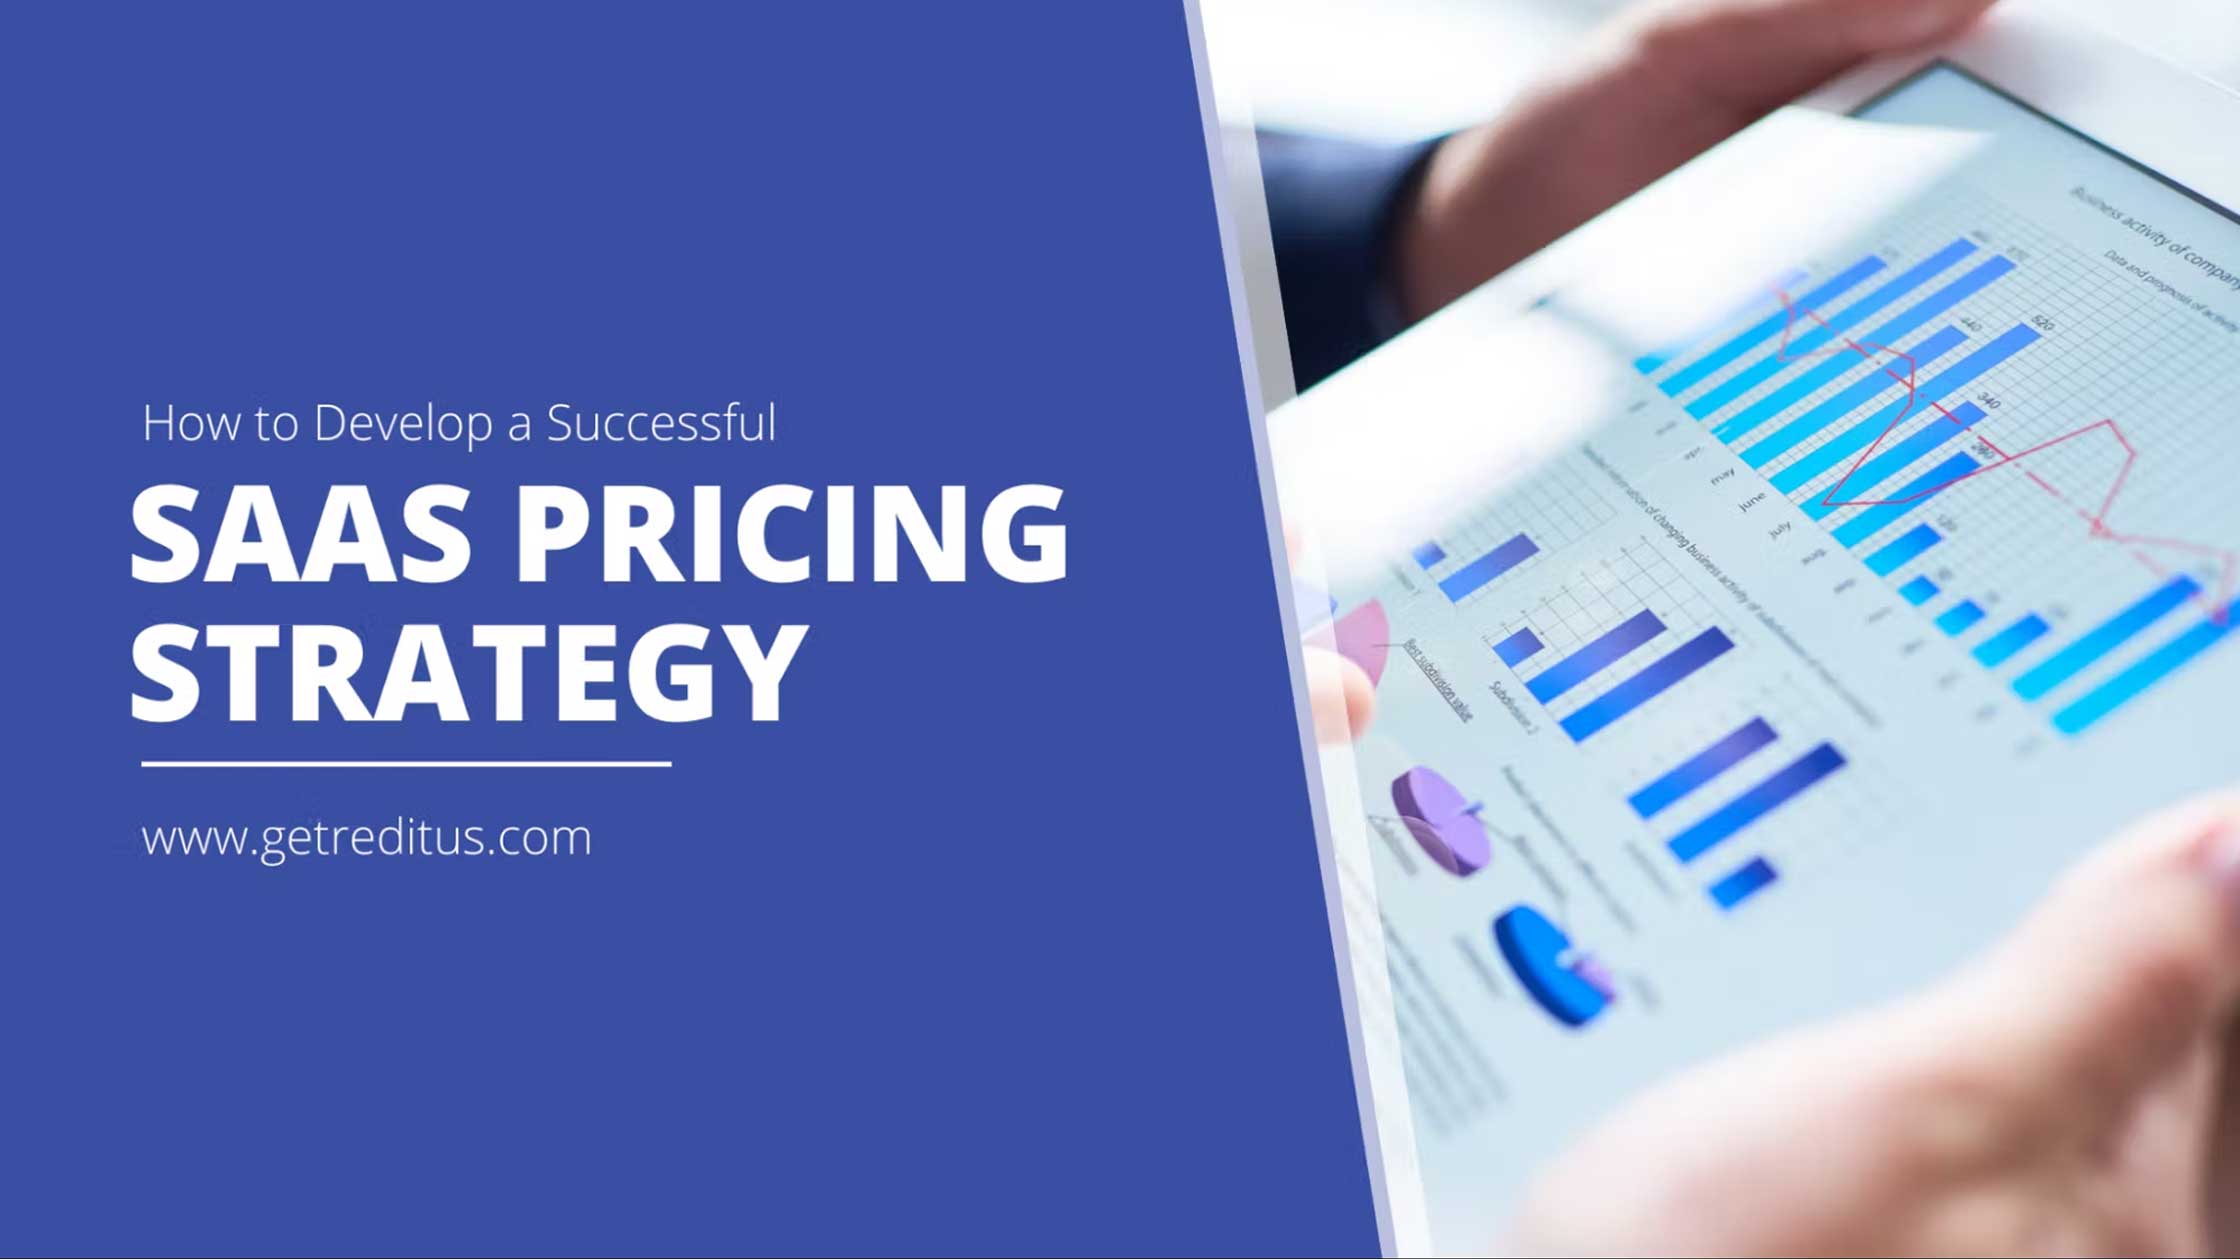 How to Develop a Successful SaaS Pricing Strategy: Complete Guide